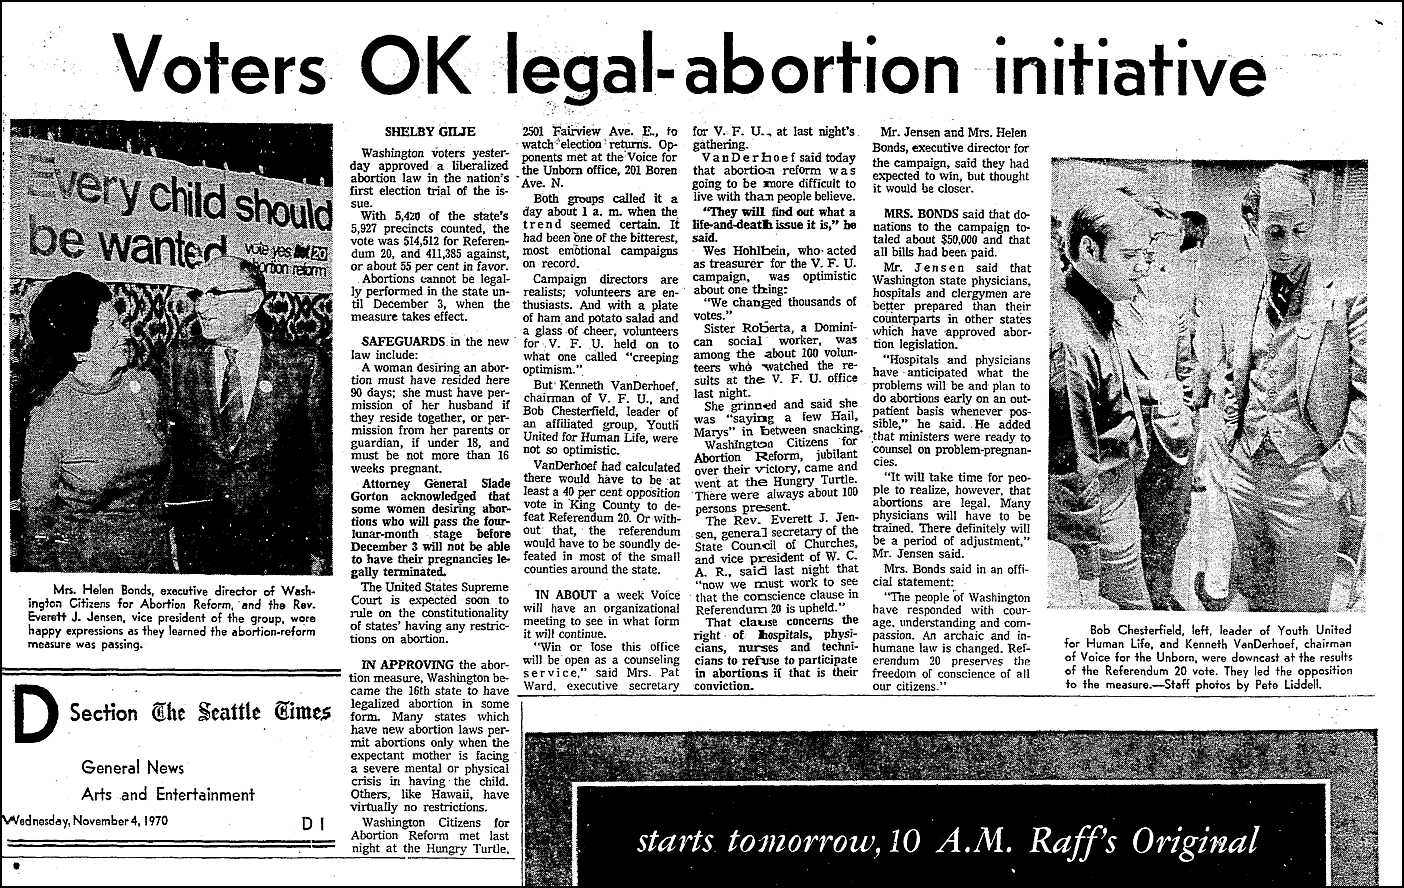 Abortion issues articles